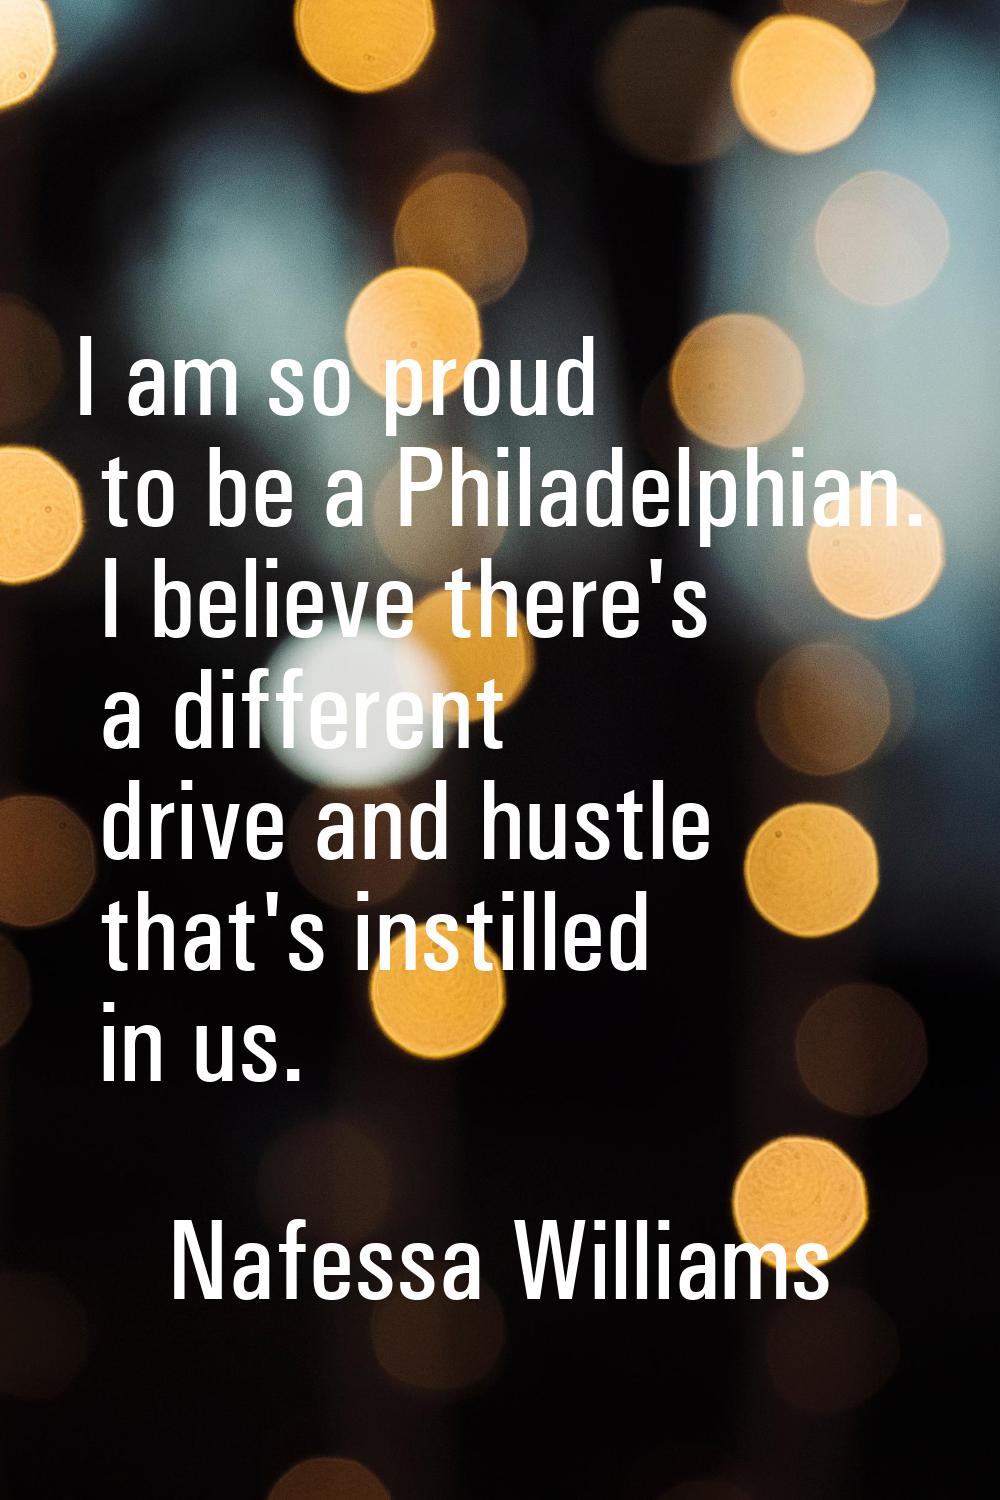 I am so proud to be a Philadelphian. I believe there's a different drive and hustle that's instille